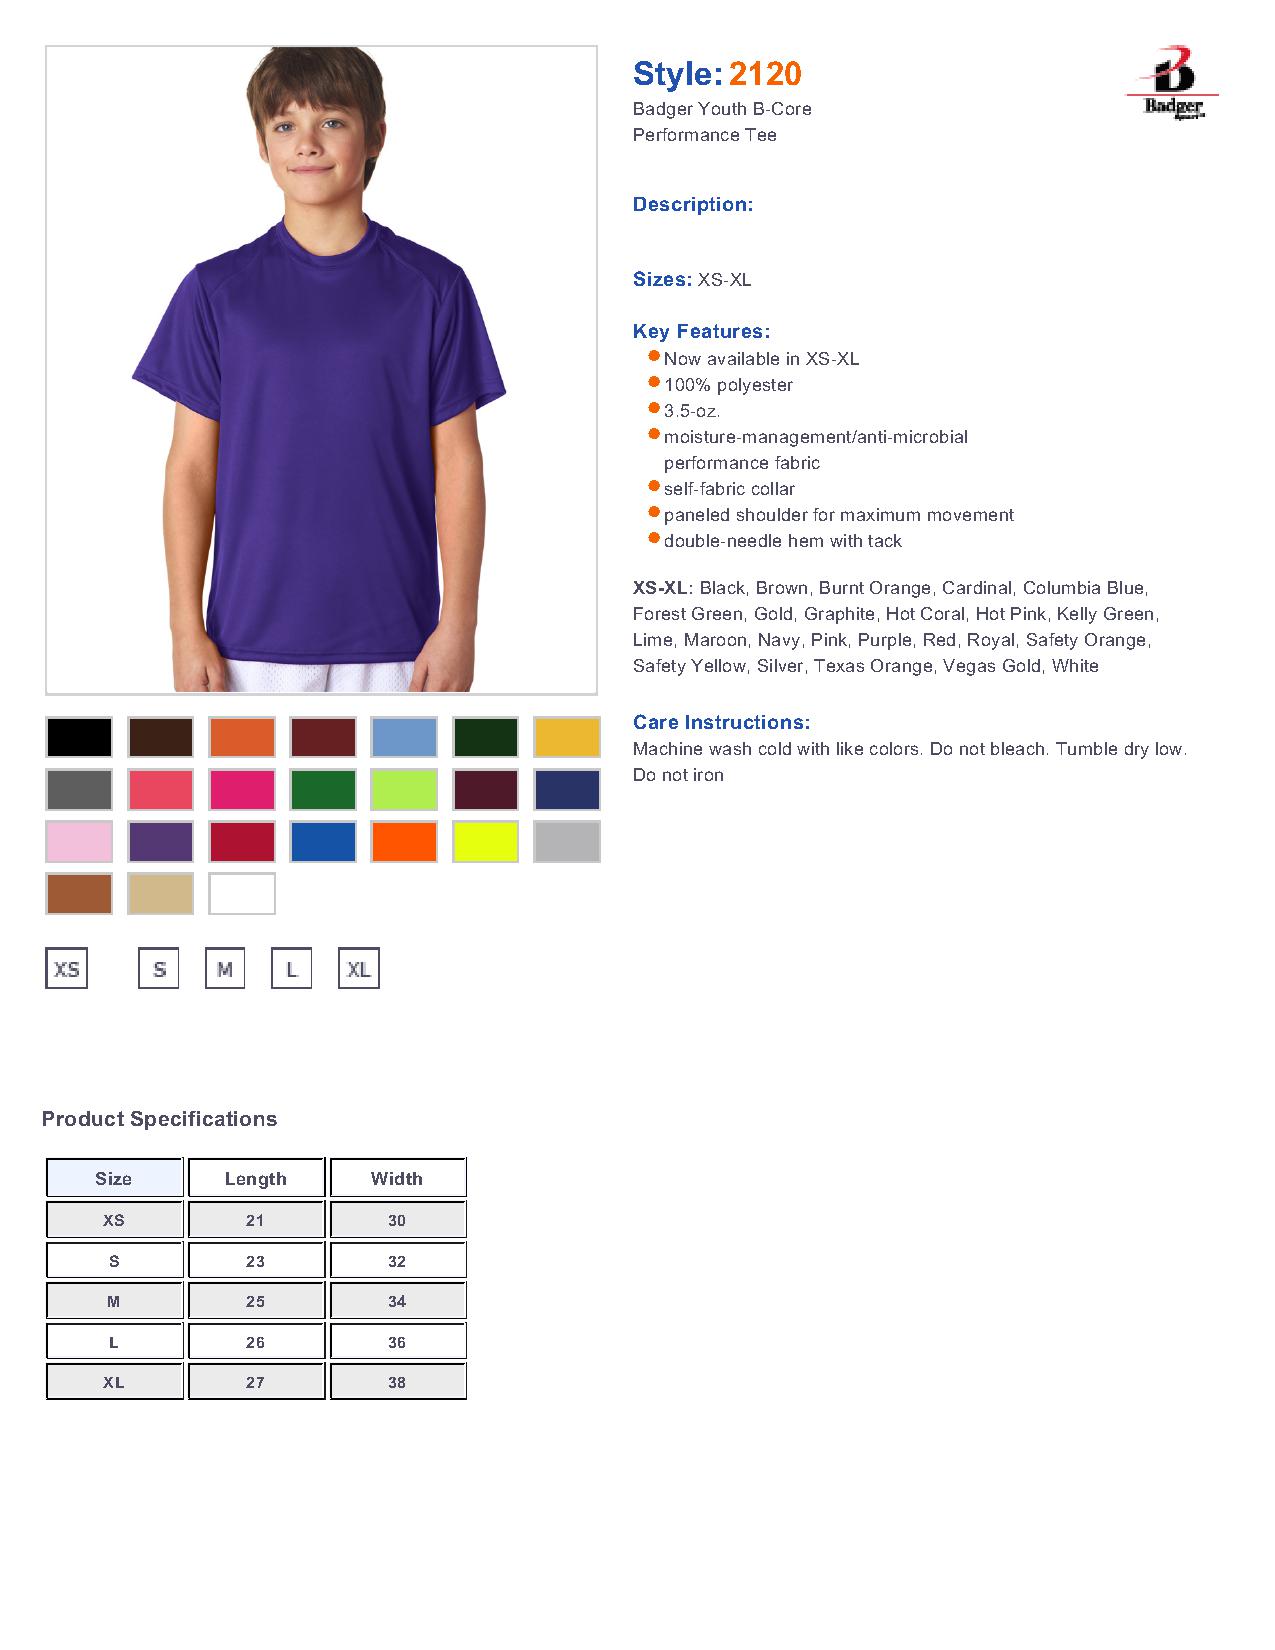 Badger Sport 2120 Youth B-Dry Core T-Shirt with Sport Shoulders $8.21 ...